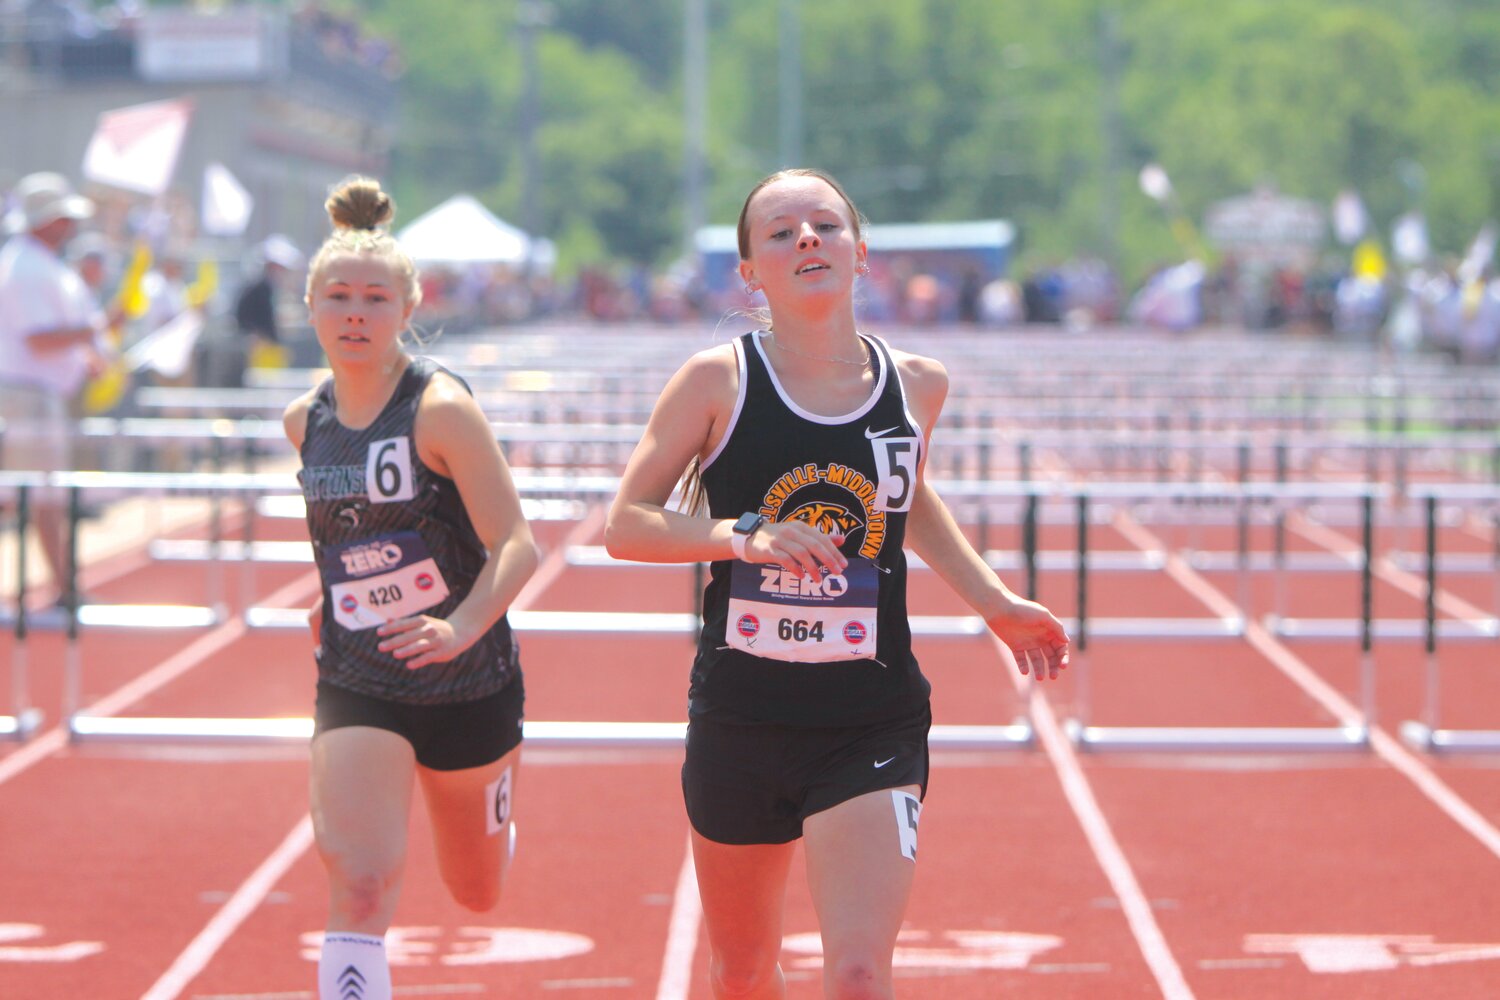 Wellsville-Middletown junior Bethany Slovensky crosses the finish line in the 100-meter hurdles finals at the Class 1 state meet on May 20 at Jefferson City. Slovensky earned three medals, finishing second in the 100-meter hurdles and long jump and placing fourth in the 300-meter hurdles.